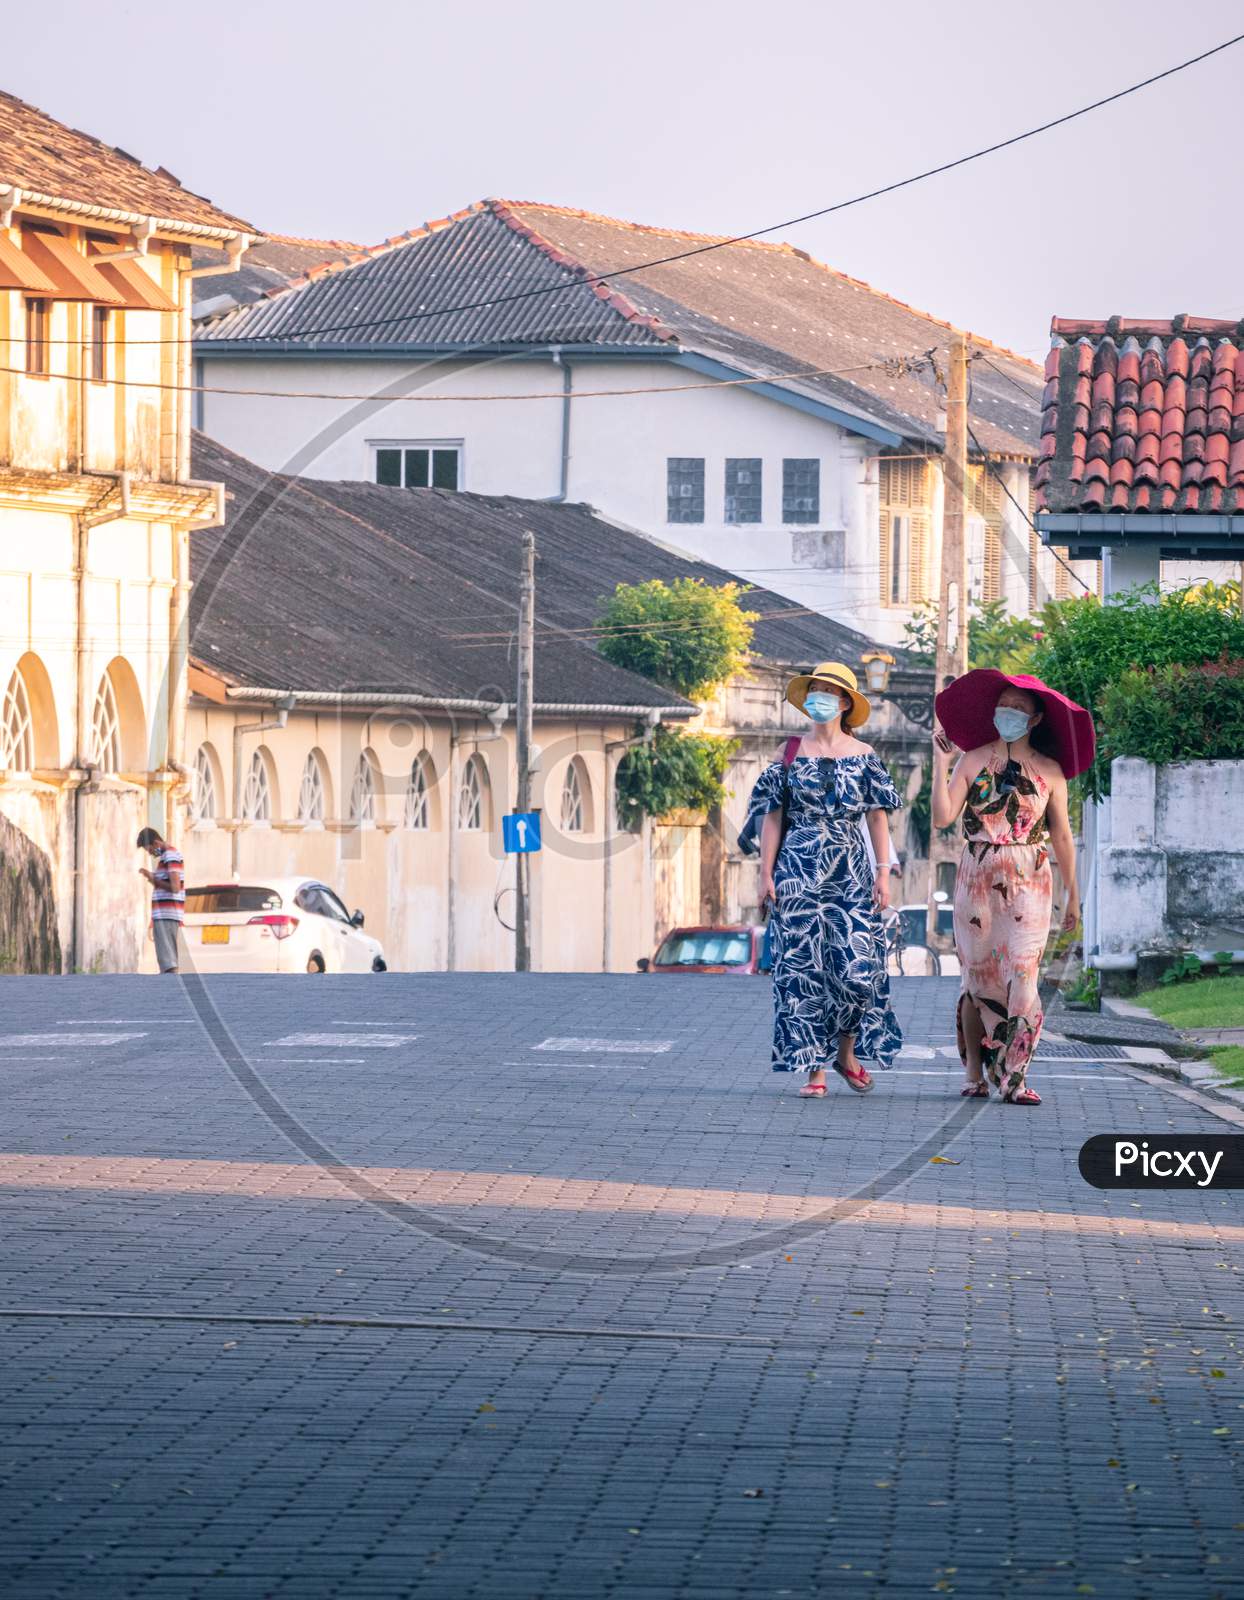 Galle, Sri Lanka - 02 12 2021: Two Female Tourists With Big Hats Walks In The Streets Of Galle Fort In The Evening, Enjoying The Beautiful View Of Colonial Age Built City. Interlock Blocks Street.